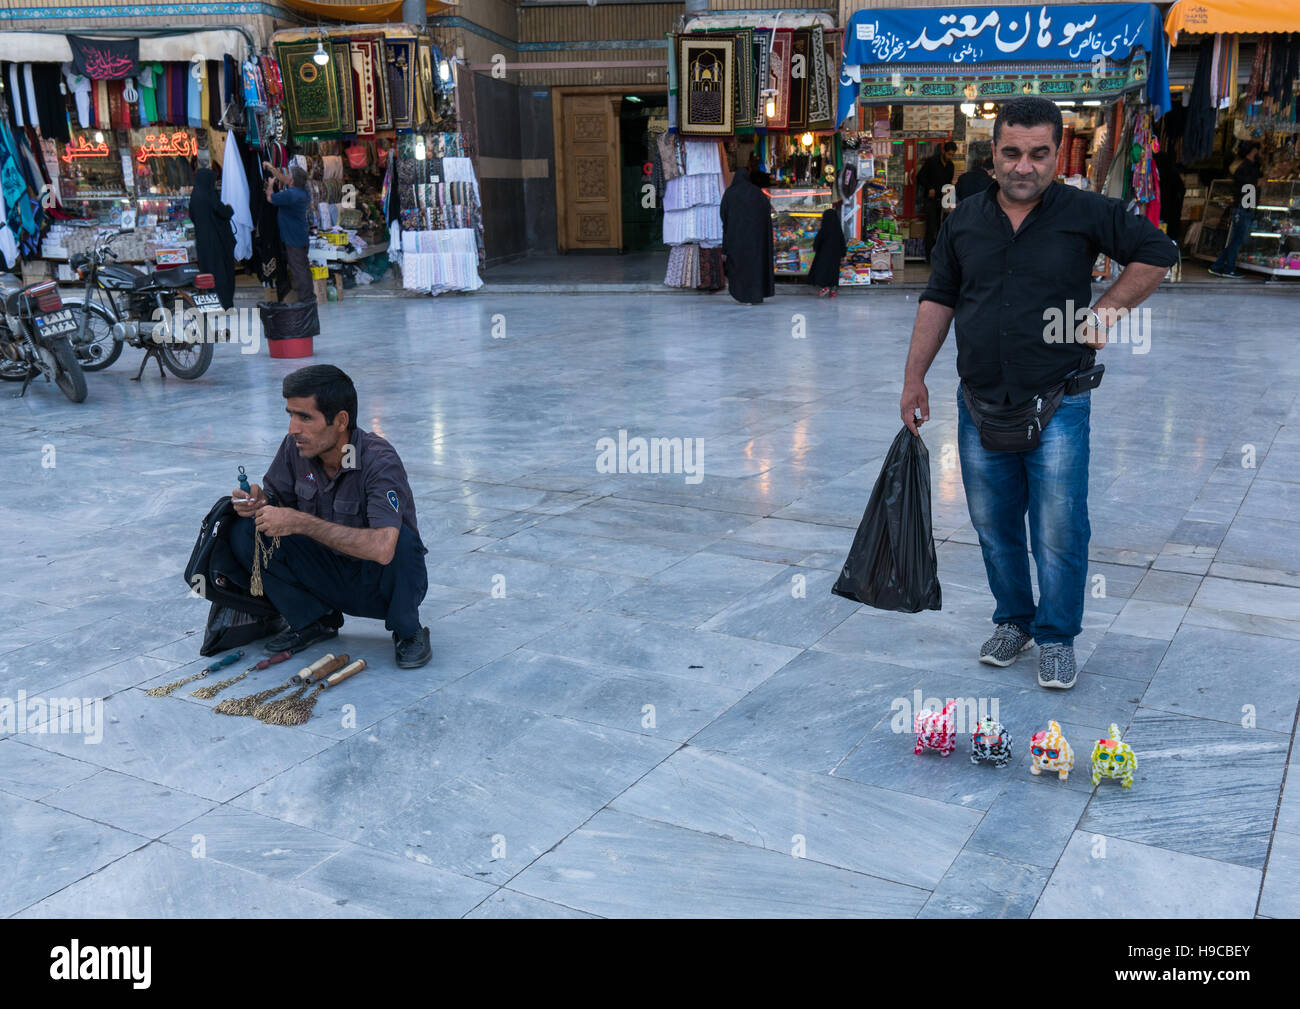 Men selling iron chains for children and toys  in fatima al-masumeh shrine during muharram, Central county, Qom, Iran Stock Photo